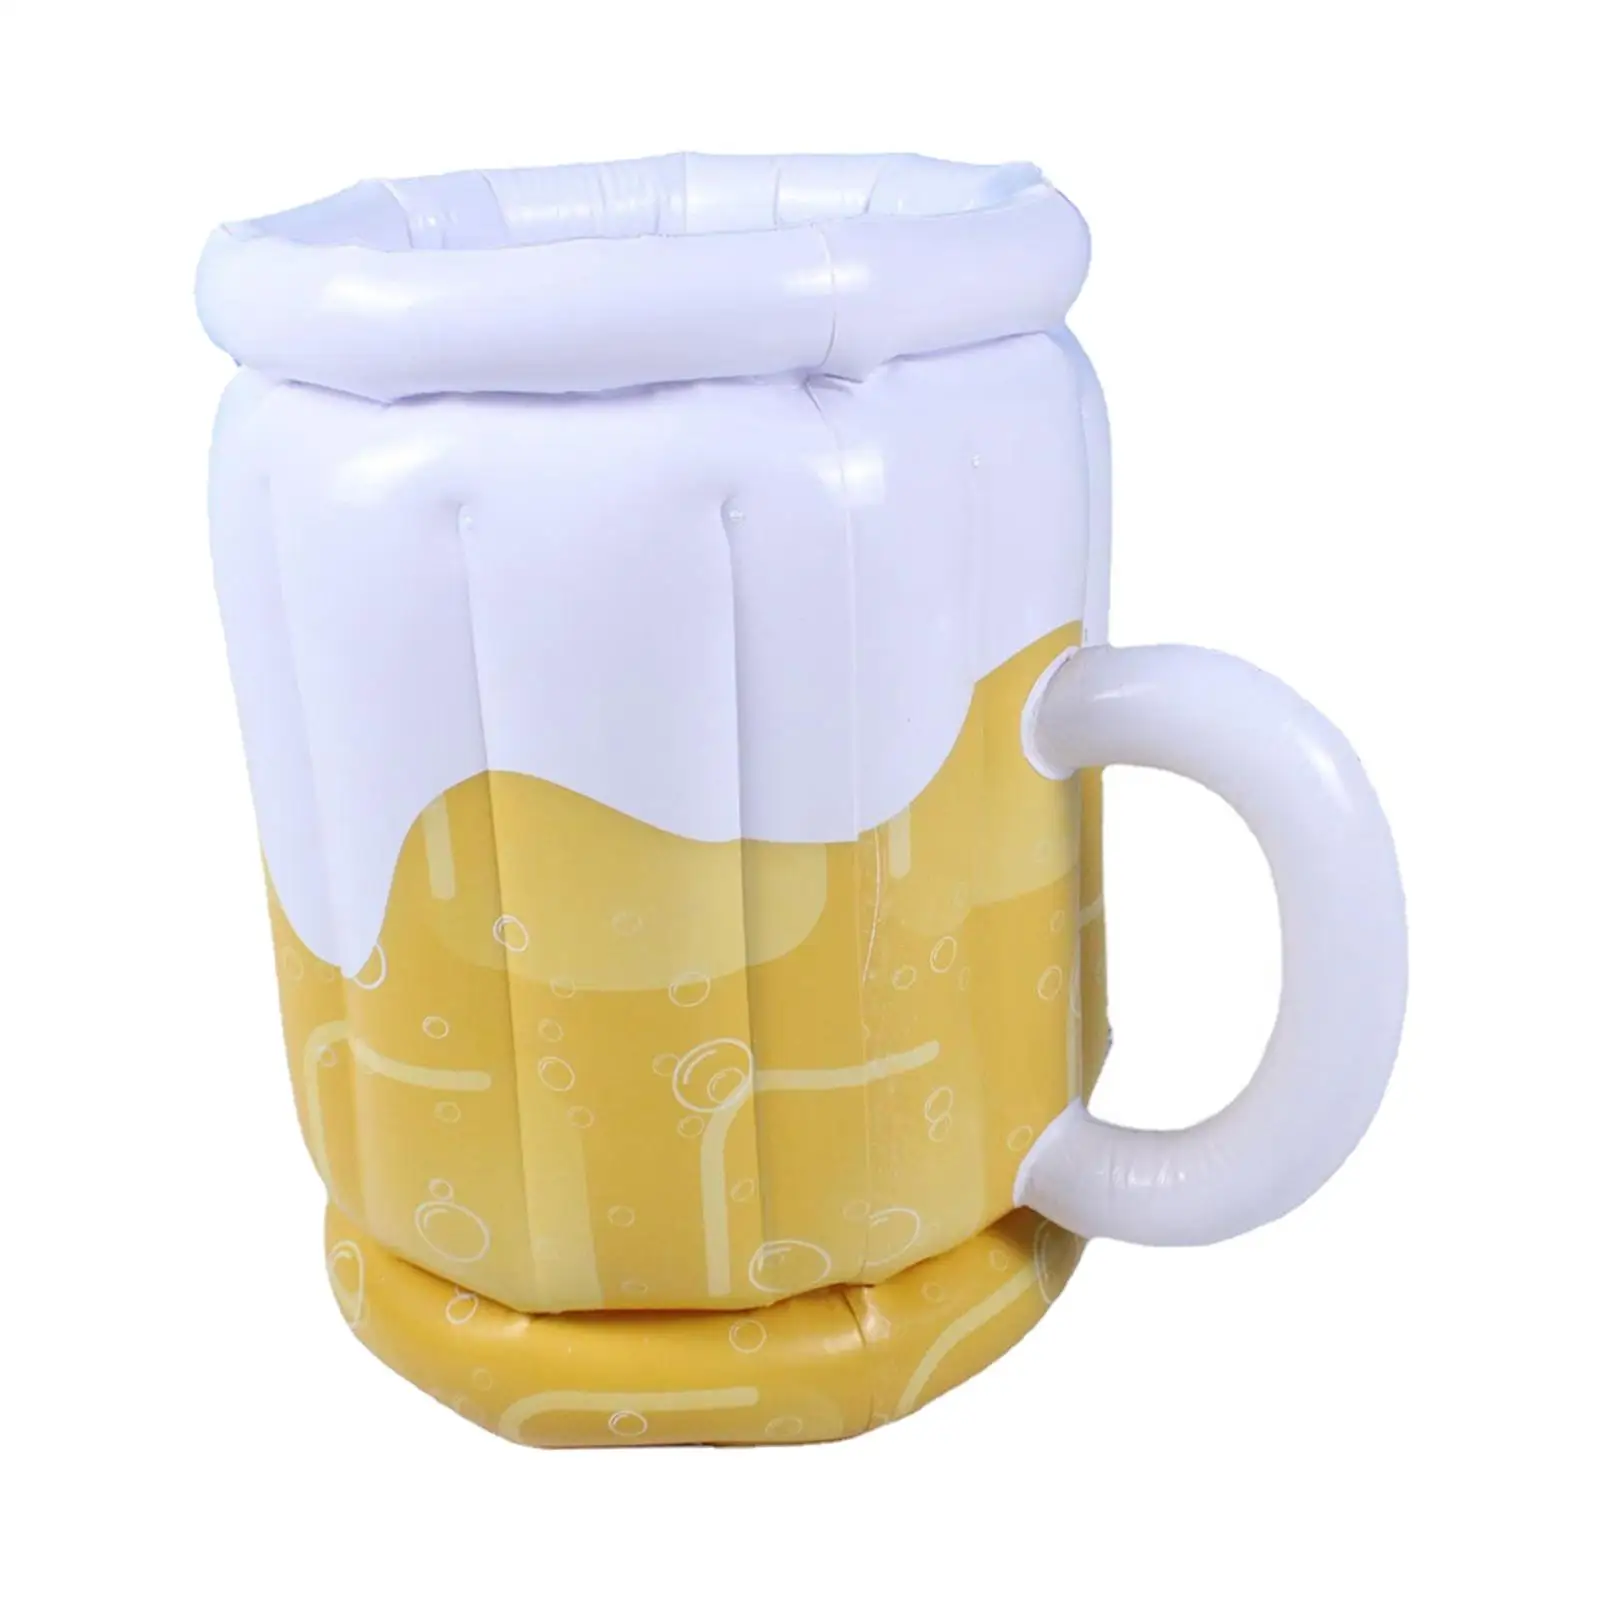 Inflatable Beer Mug Cooler Buffet Cooler Beer Mug Cooler Ice Bucket Cooler for Pool Party Decorations Beach BBQ Outdoor Camping